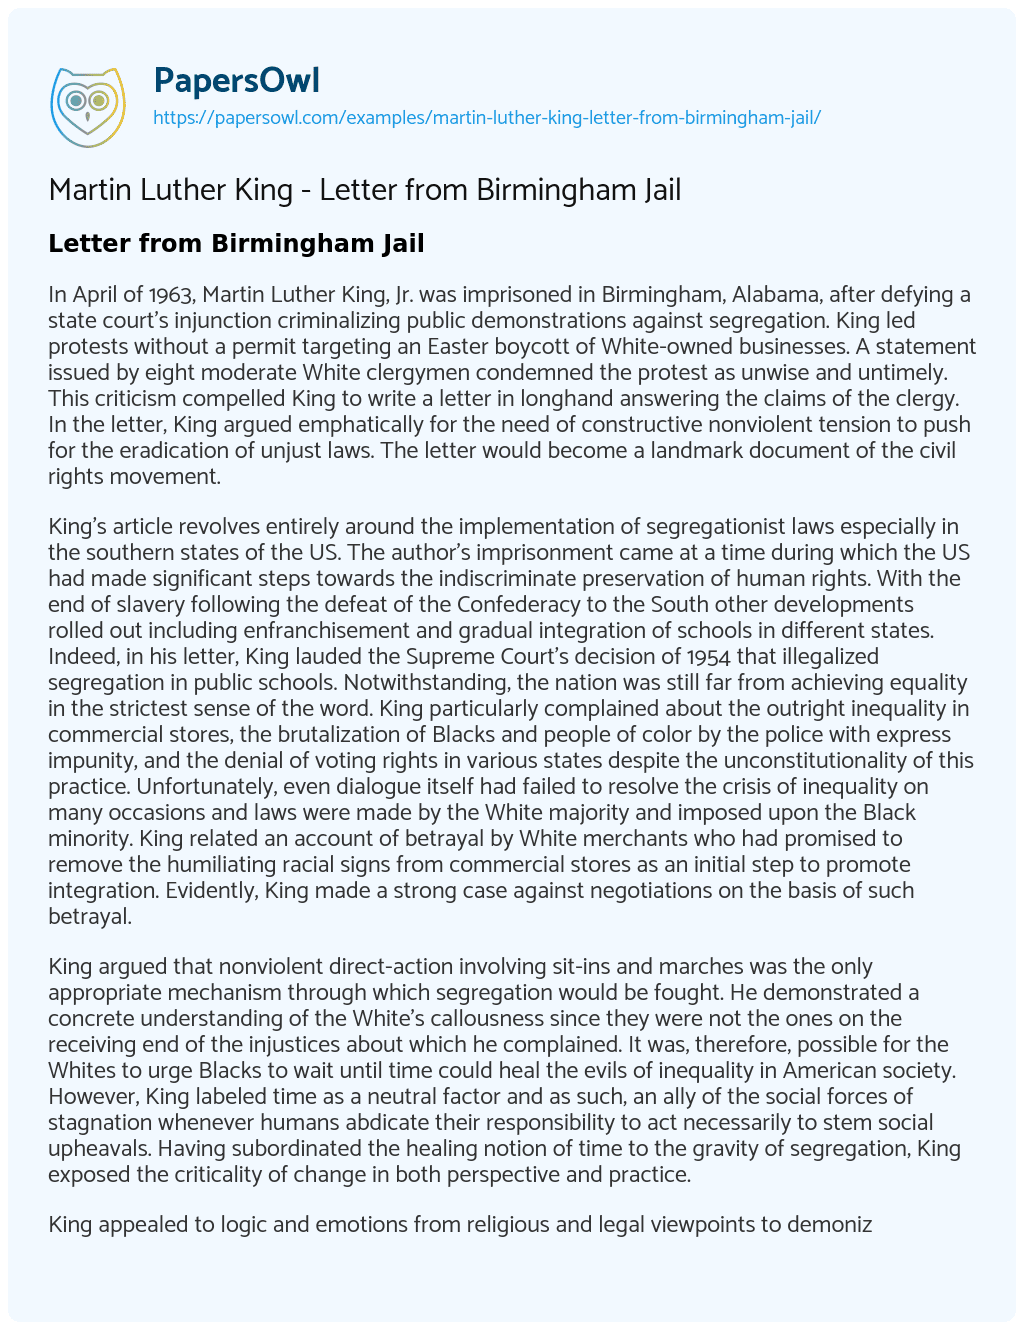 Essay on Martin Luther King – Letter from Birmingham Jail